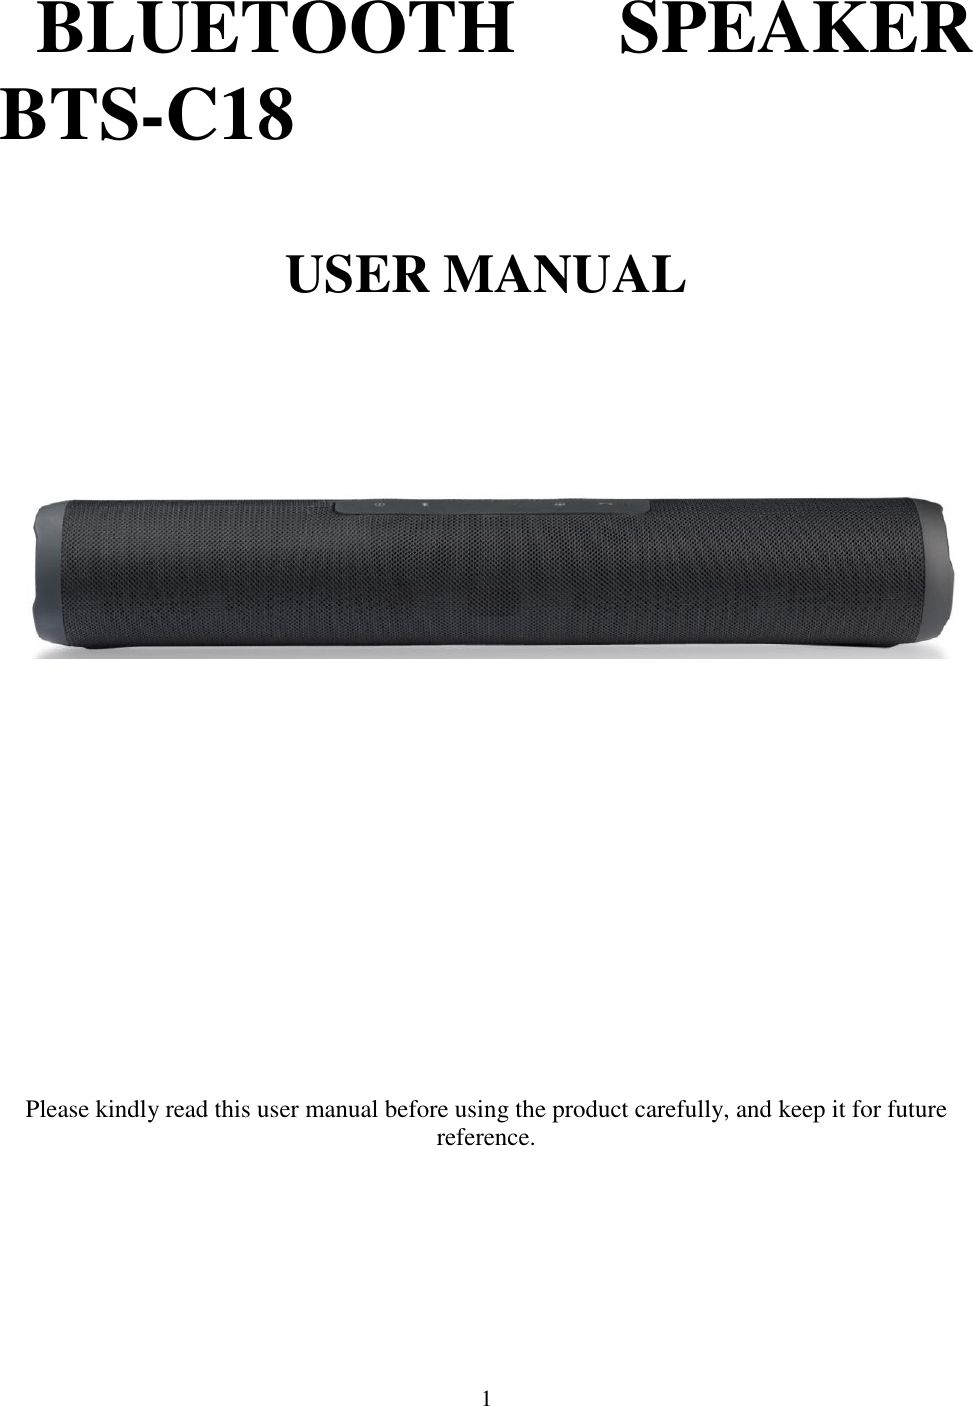 1  BLUETOOTH  SPEAKER  BTS-C18  USER MANUAL                  Please kindly read this user manual before using the product carefully, and keep it for future reference.        